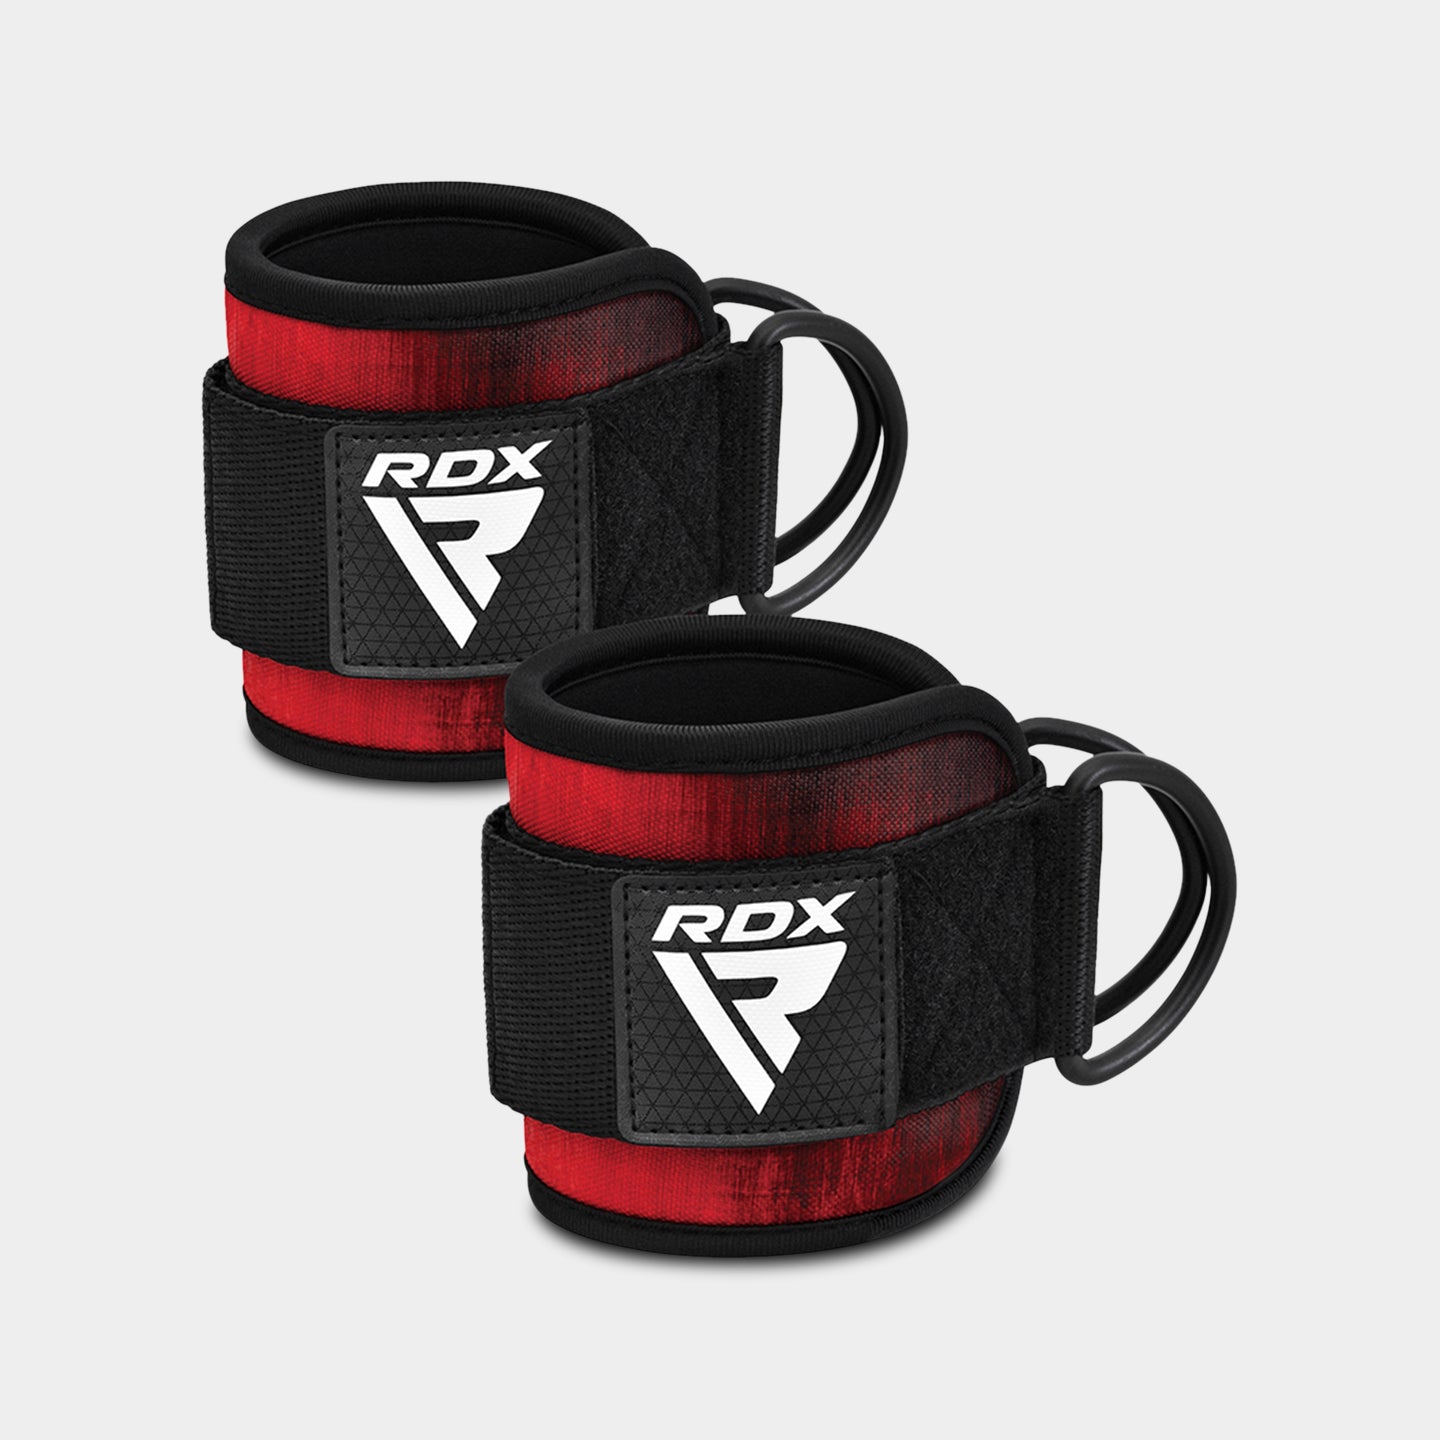 RDX Sports A4 Ankle Straps For Gym Cable Machine, Standard Size, Red A1